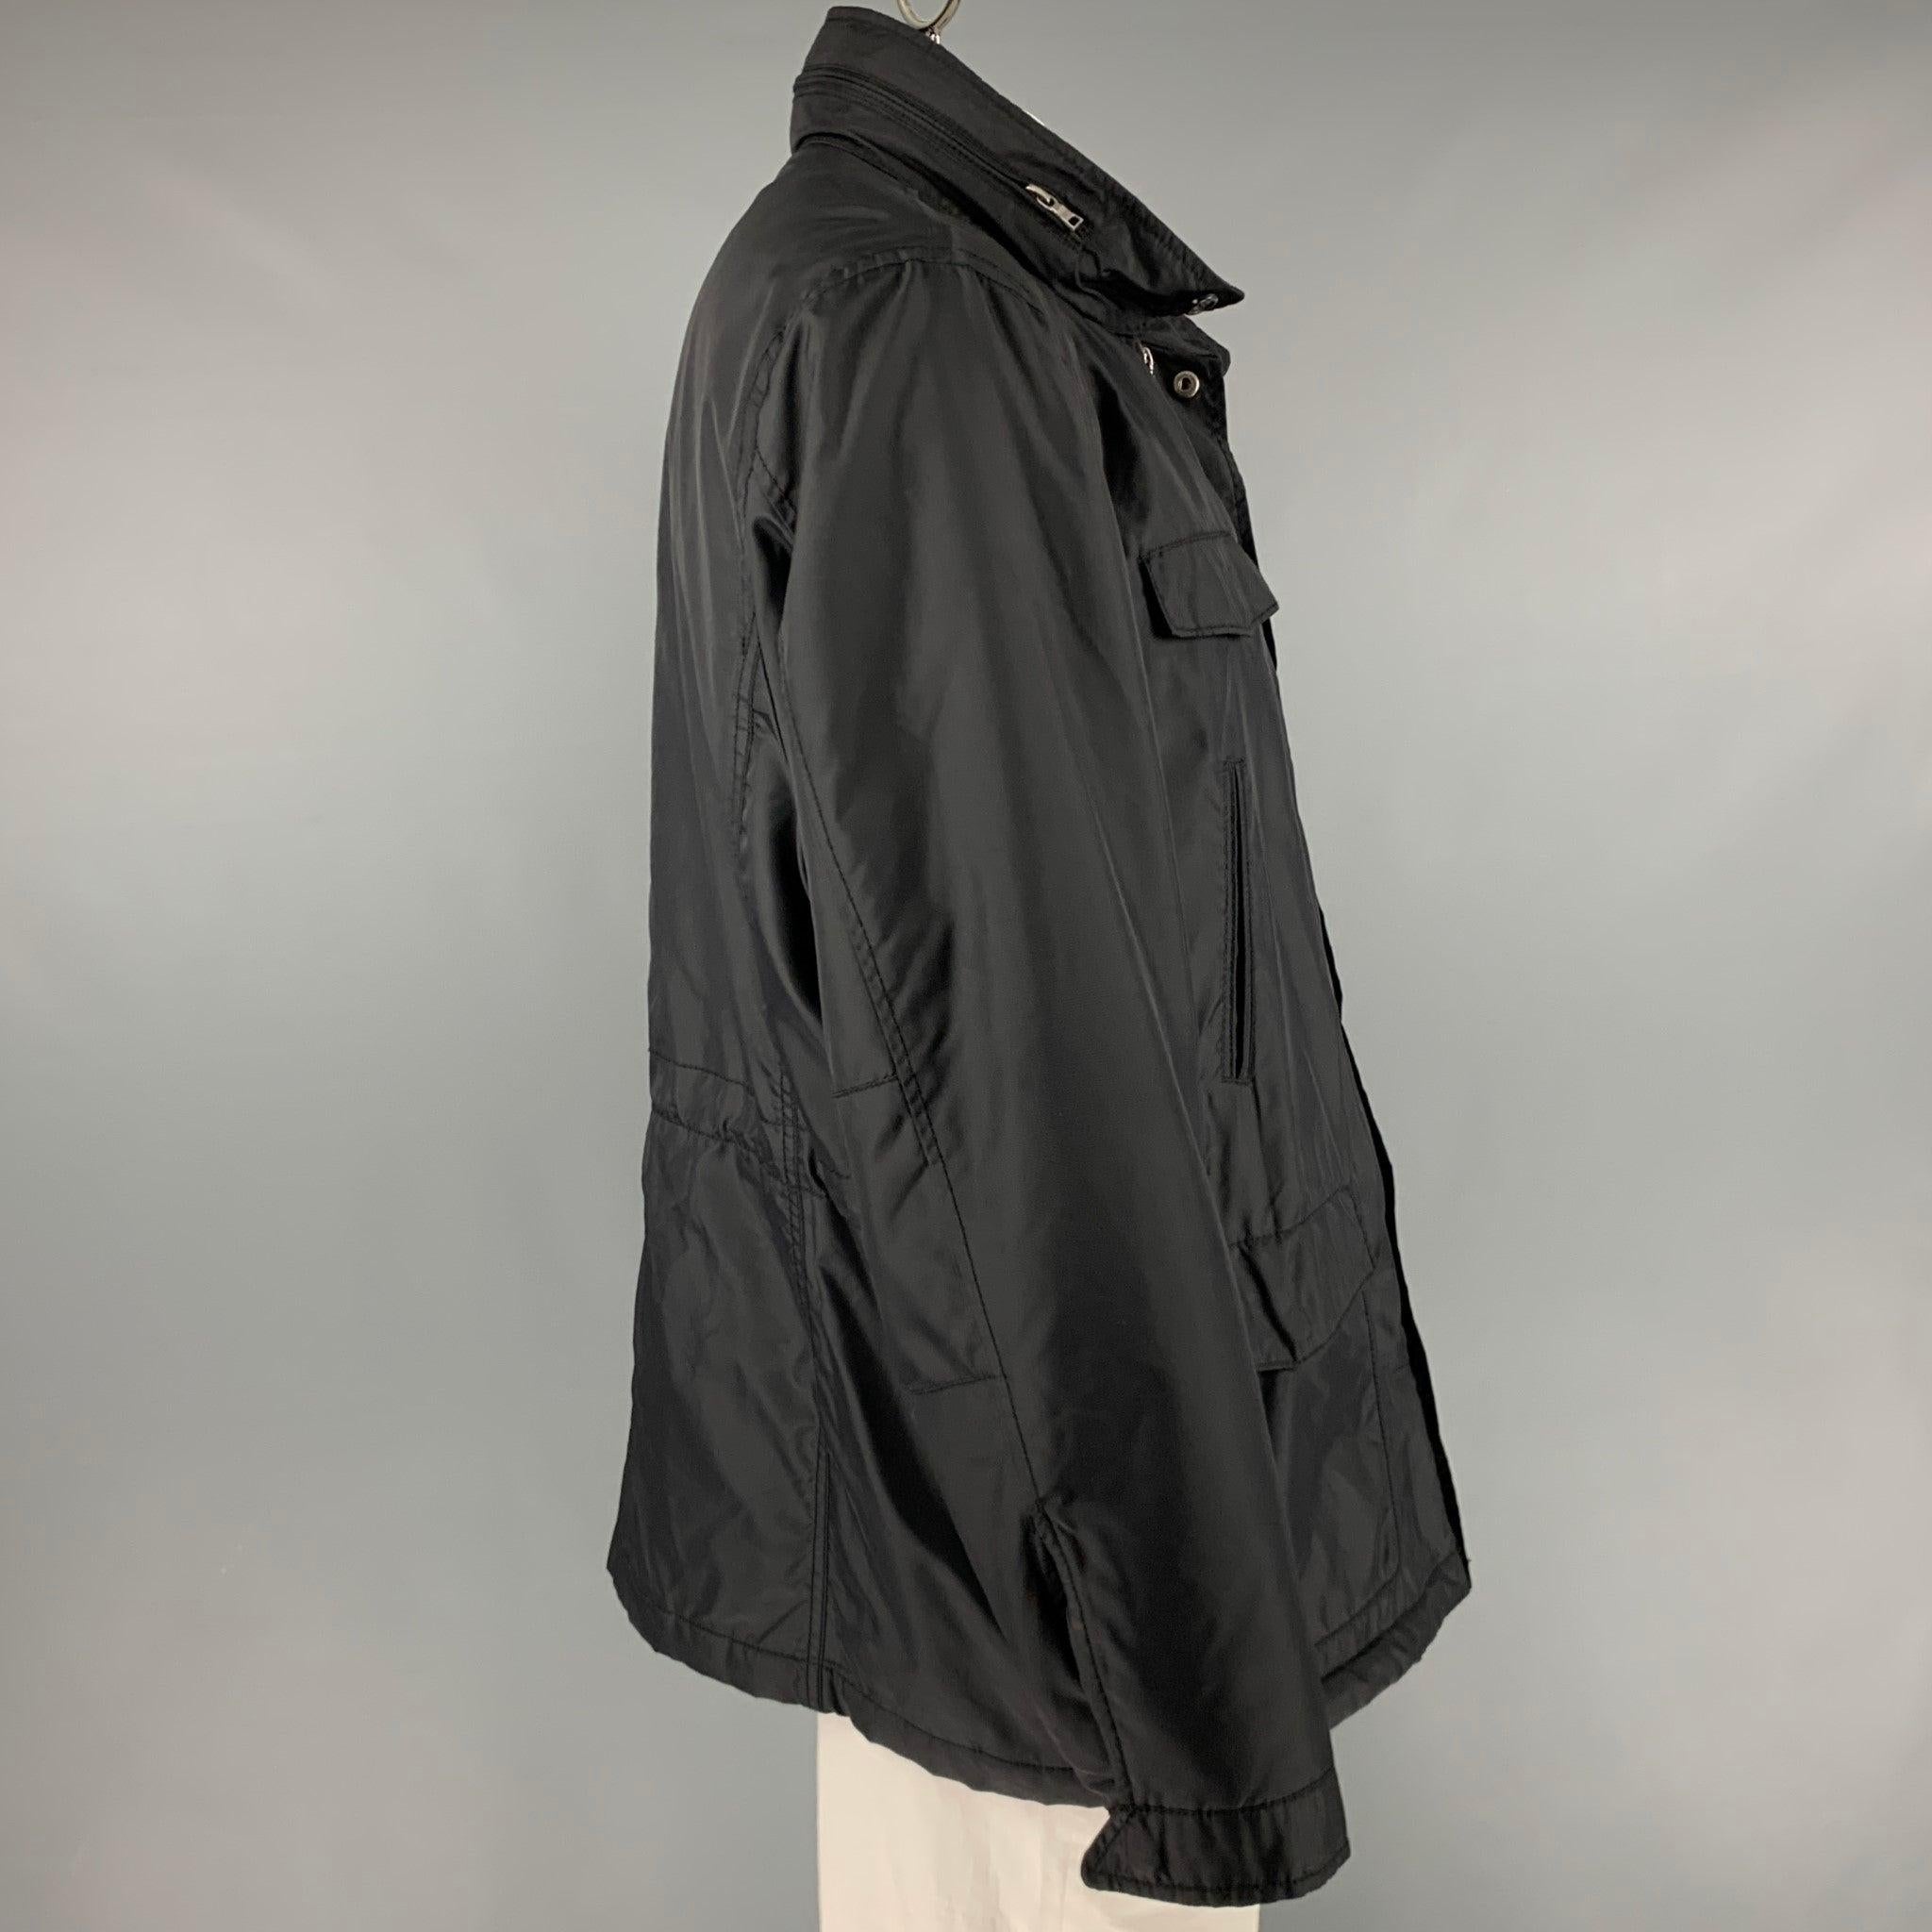 CALVIN KLEIN jacket
in a
black polyester fabric featuring multiple pockets, hidden hood, and zip up and snap closure.Excellent Pre-Owned Condition. 

Marked:   2XL 

Measurements: 
 
Shoulder: 18.5 inches Chest: 52 inches Sleeve: 26.5 inches Length: